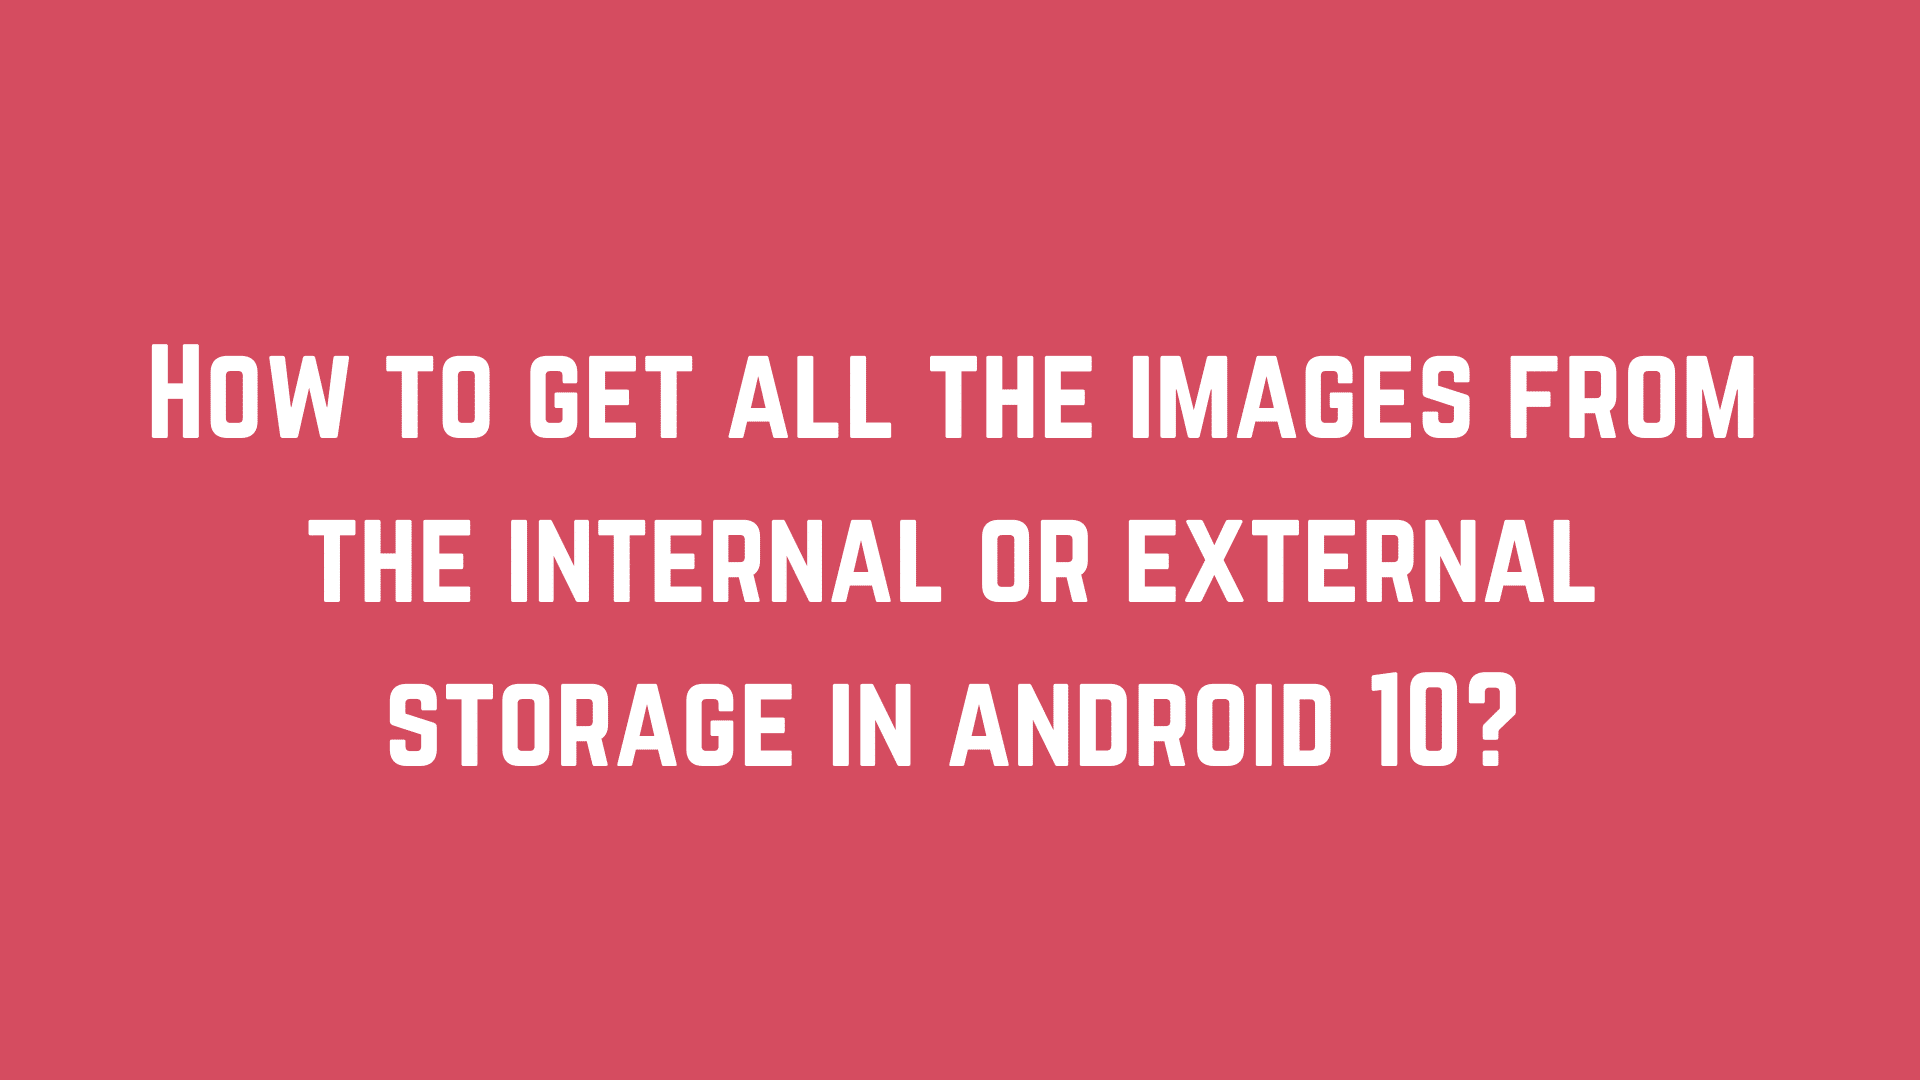 How to get all the images from the internal or external storage in android 10?